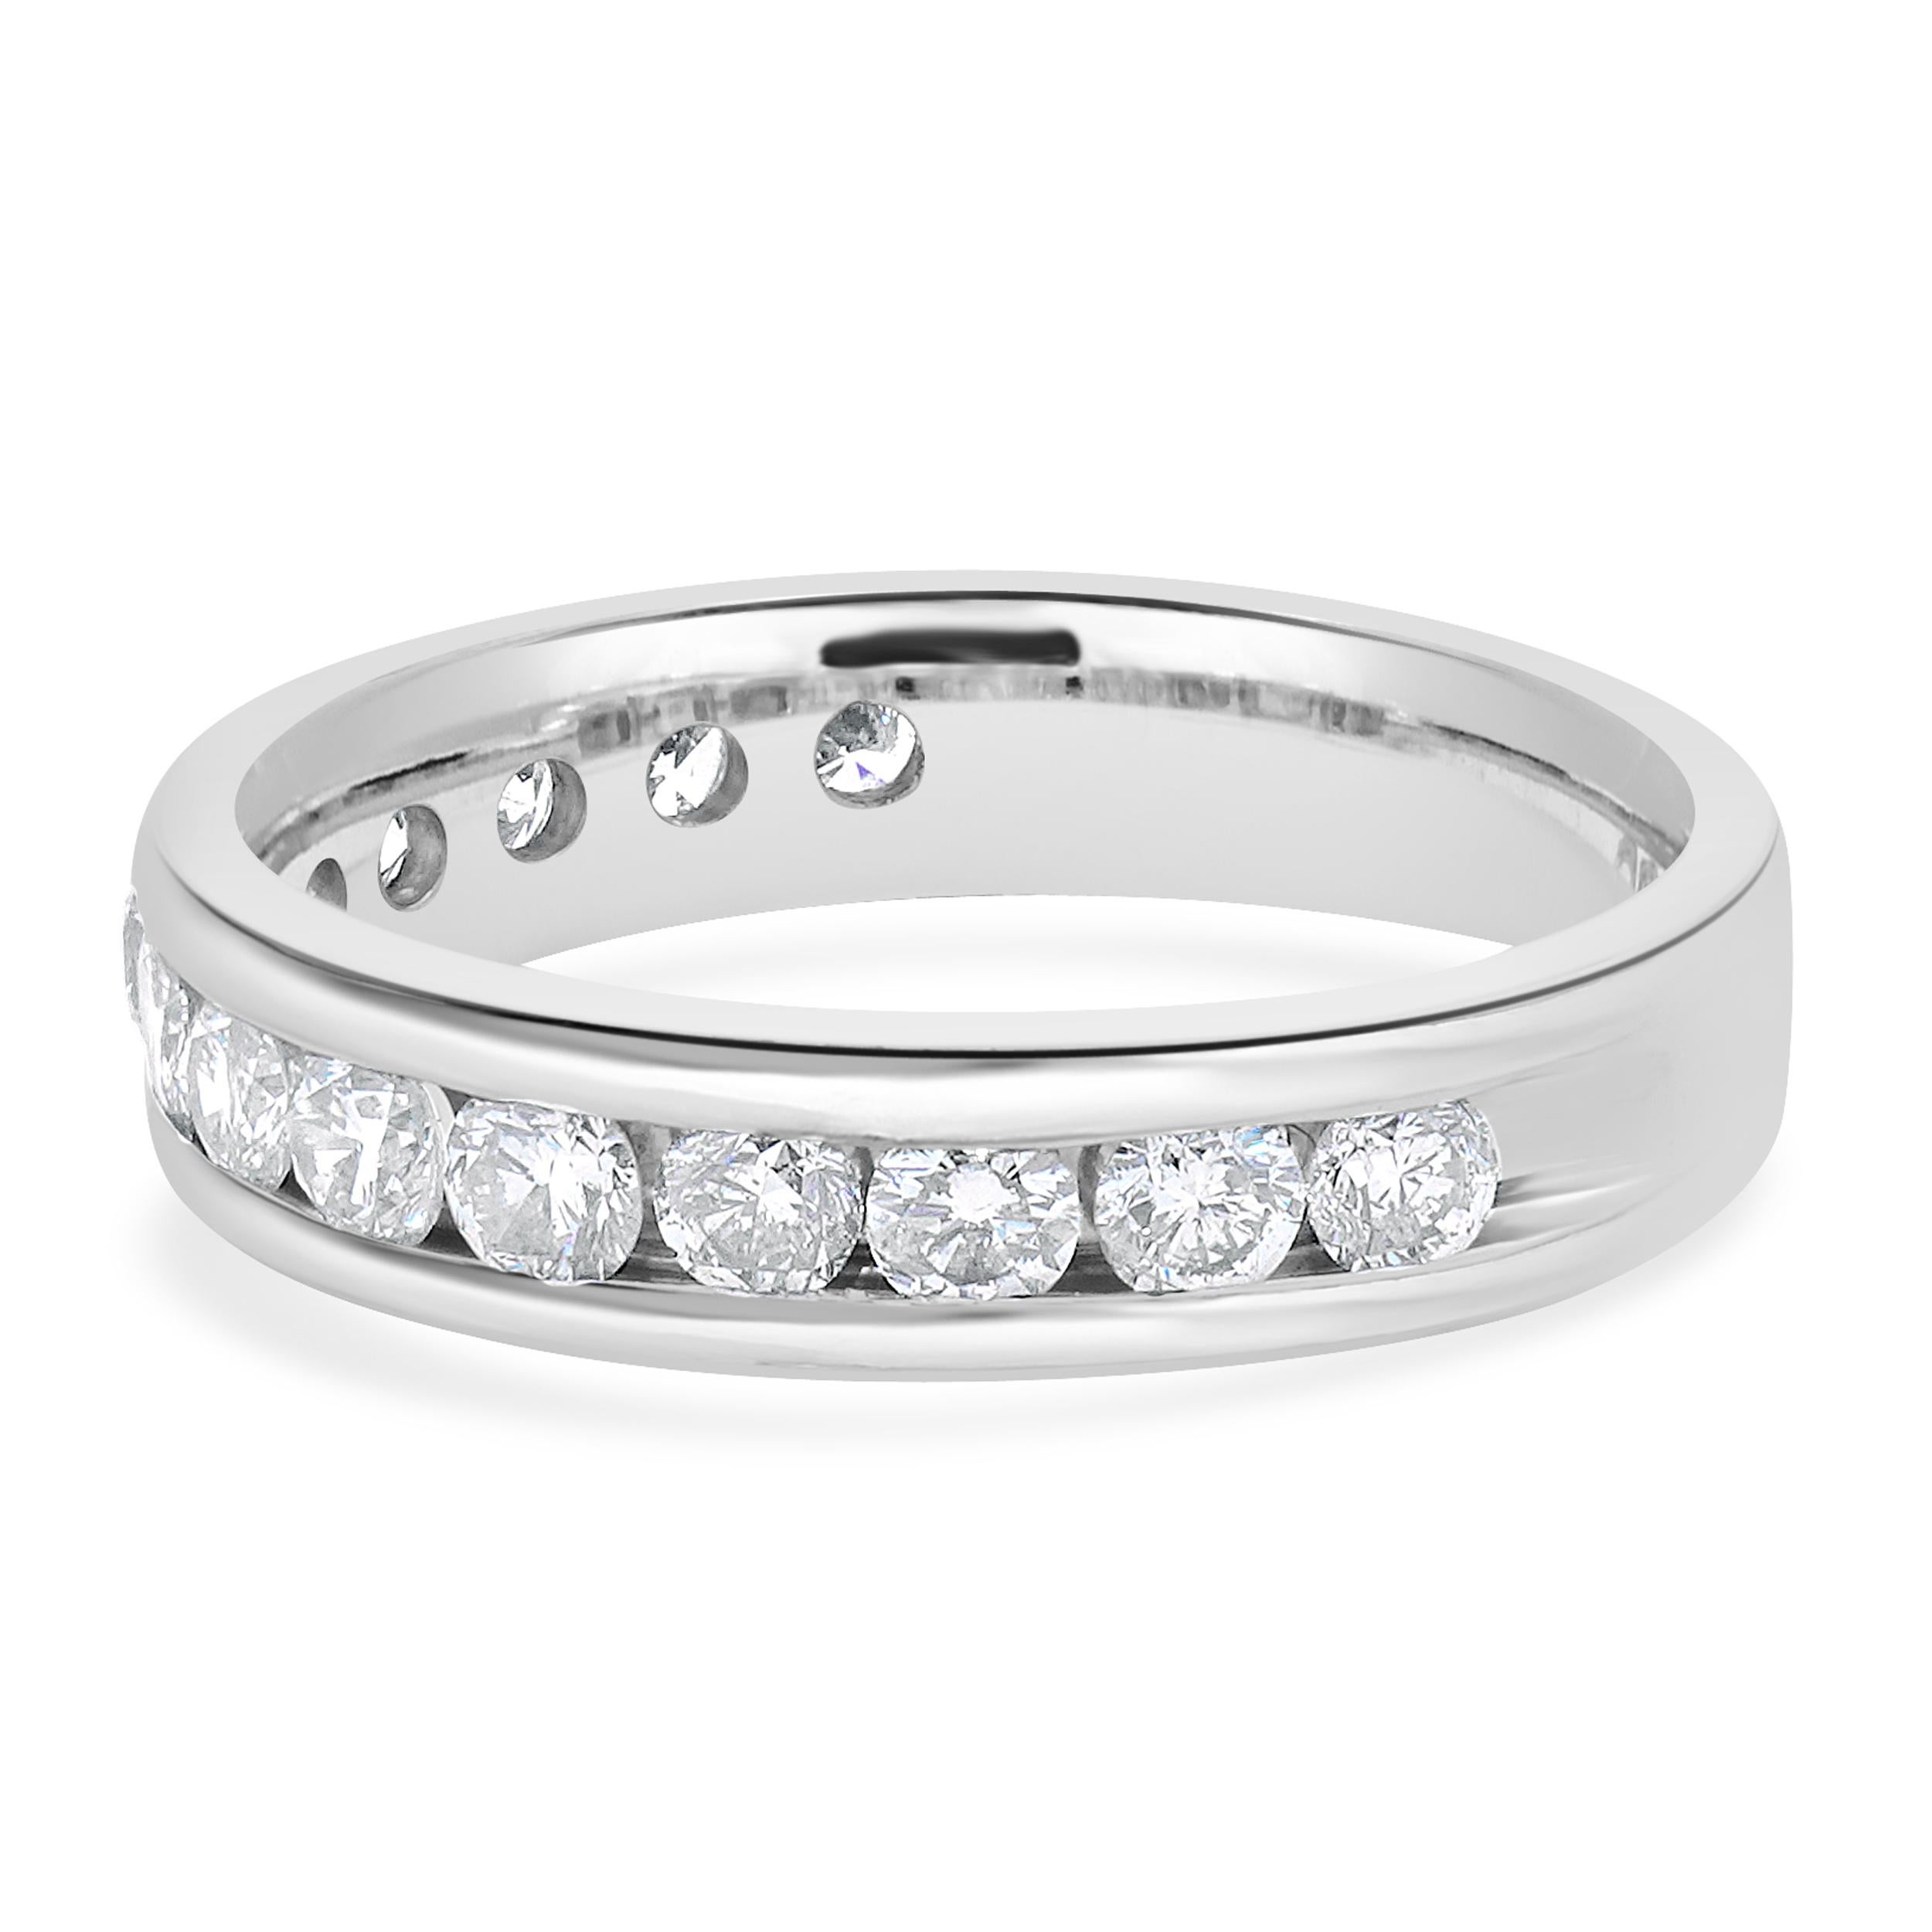 Designer: Custom
Material: 14K white gold
Diamonds: 14 round brilliant cut = 0.48cttw
Color: I
Clarity: SI2
Size: 7 sizing available 
Dimensions: rings measures 4.5mm in width
Weight: 3.96 grams